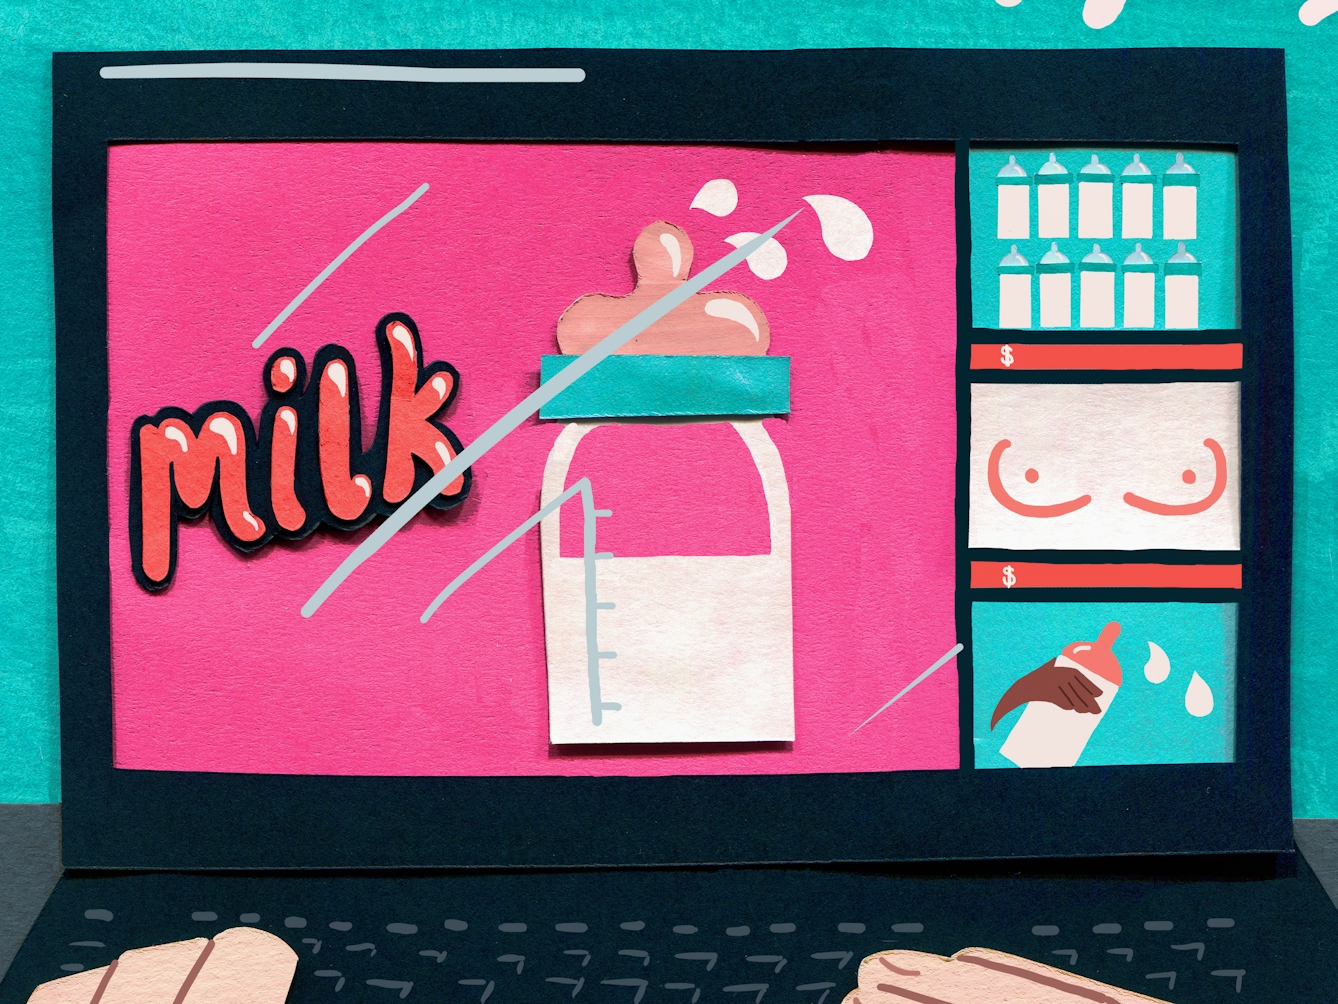 A mixed media illustration showing the screen of a laptop. The screen is displaying bottles of milk as well as depictions of breasts.